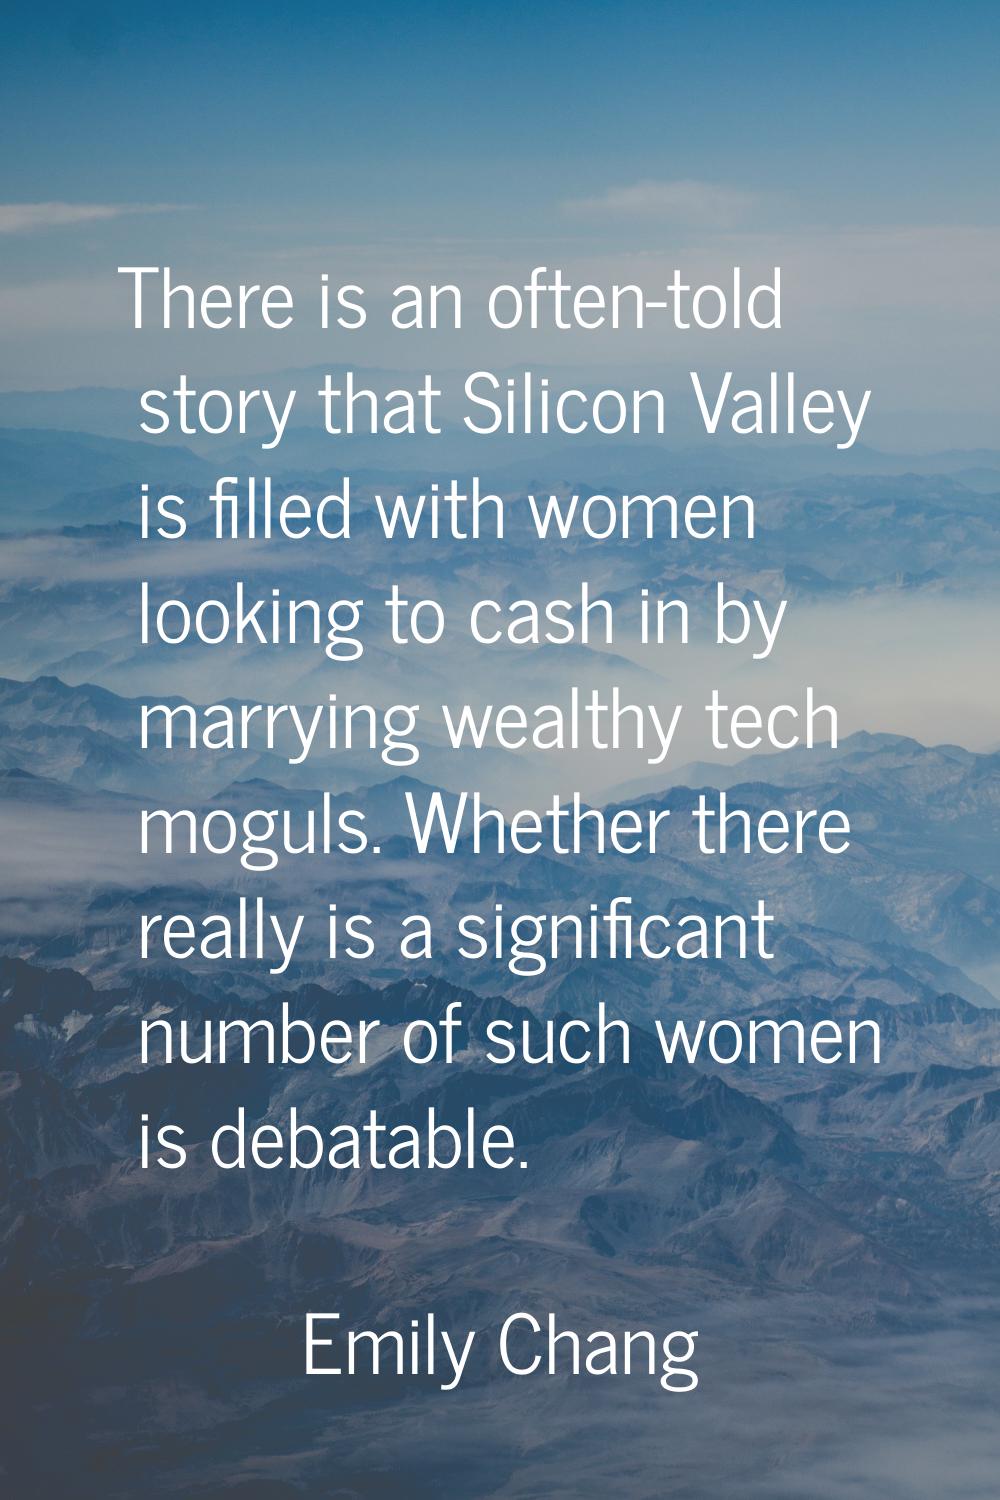 There is an often-told story that Silicon Valley is filled with women looking to cash in by marryin